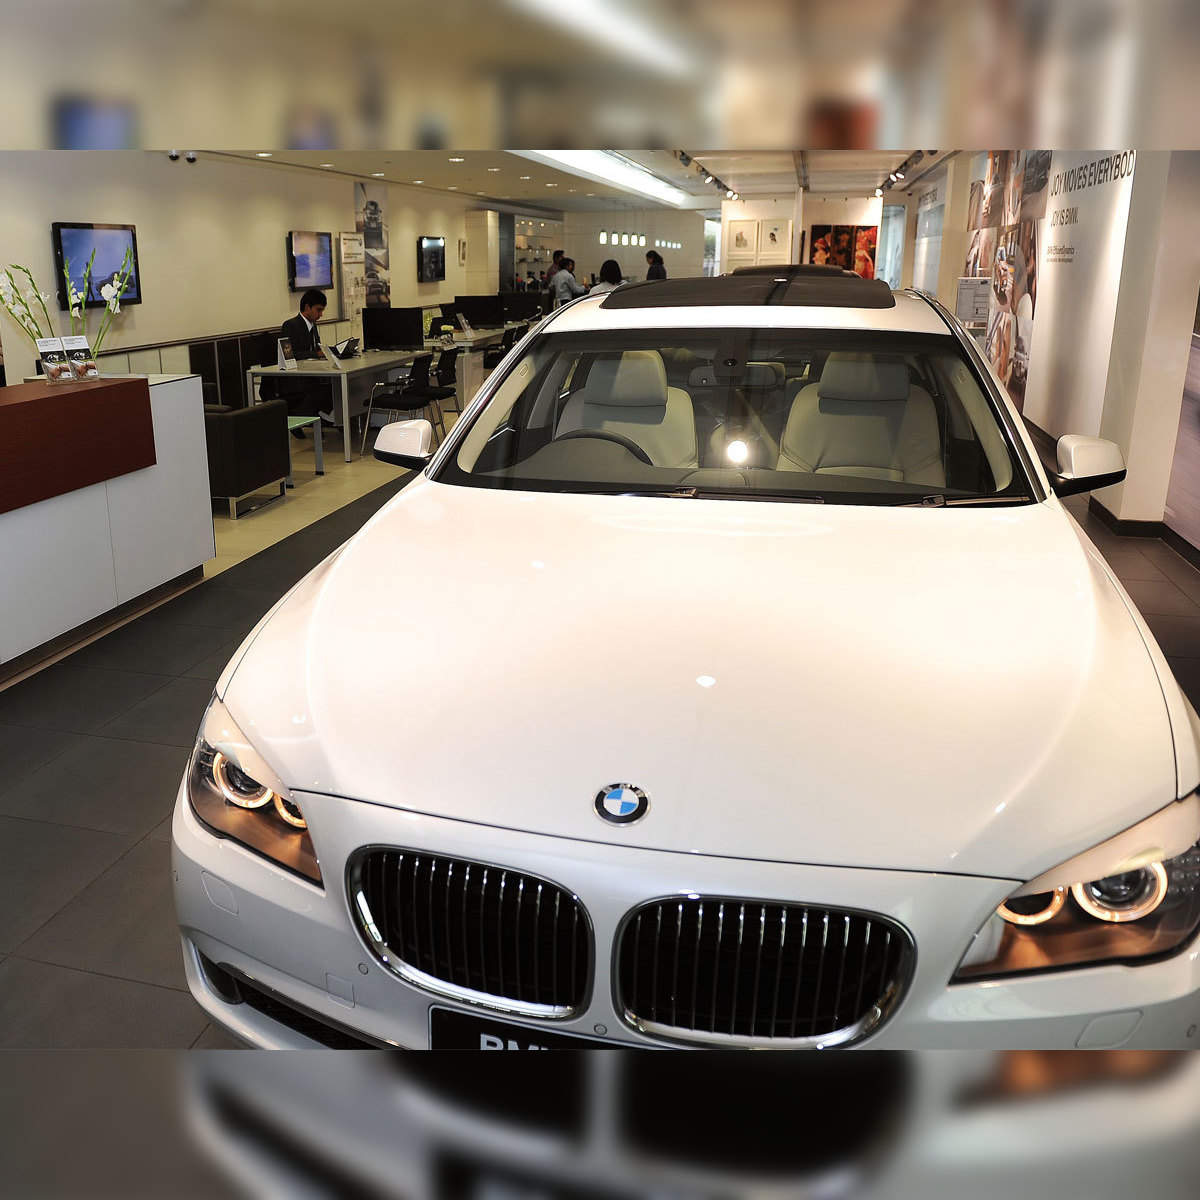 BMW India: BMW to increase vehicle prices in India by up to 2 per cent from  January - The Economic Times